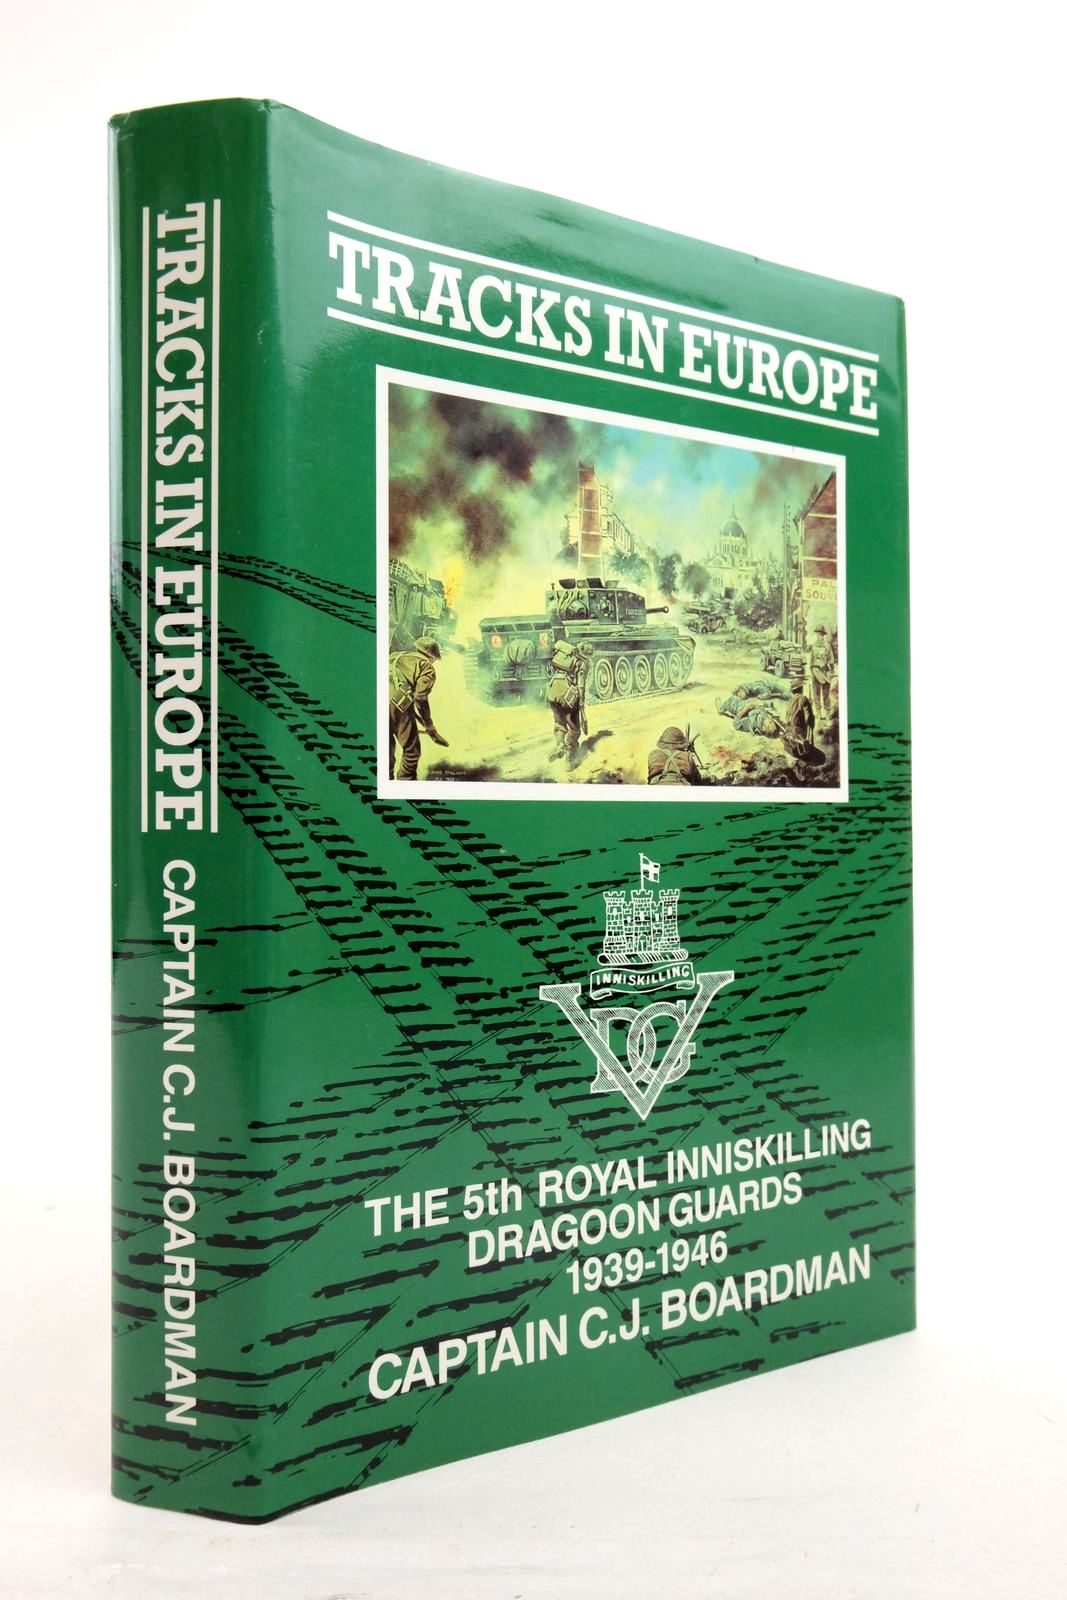 Photo of TRACKS IN EUROPE written by Boardman, C.J. published by City Press (STOCK CODE: 2138002)  for sale by Stella & Rose's Books